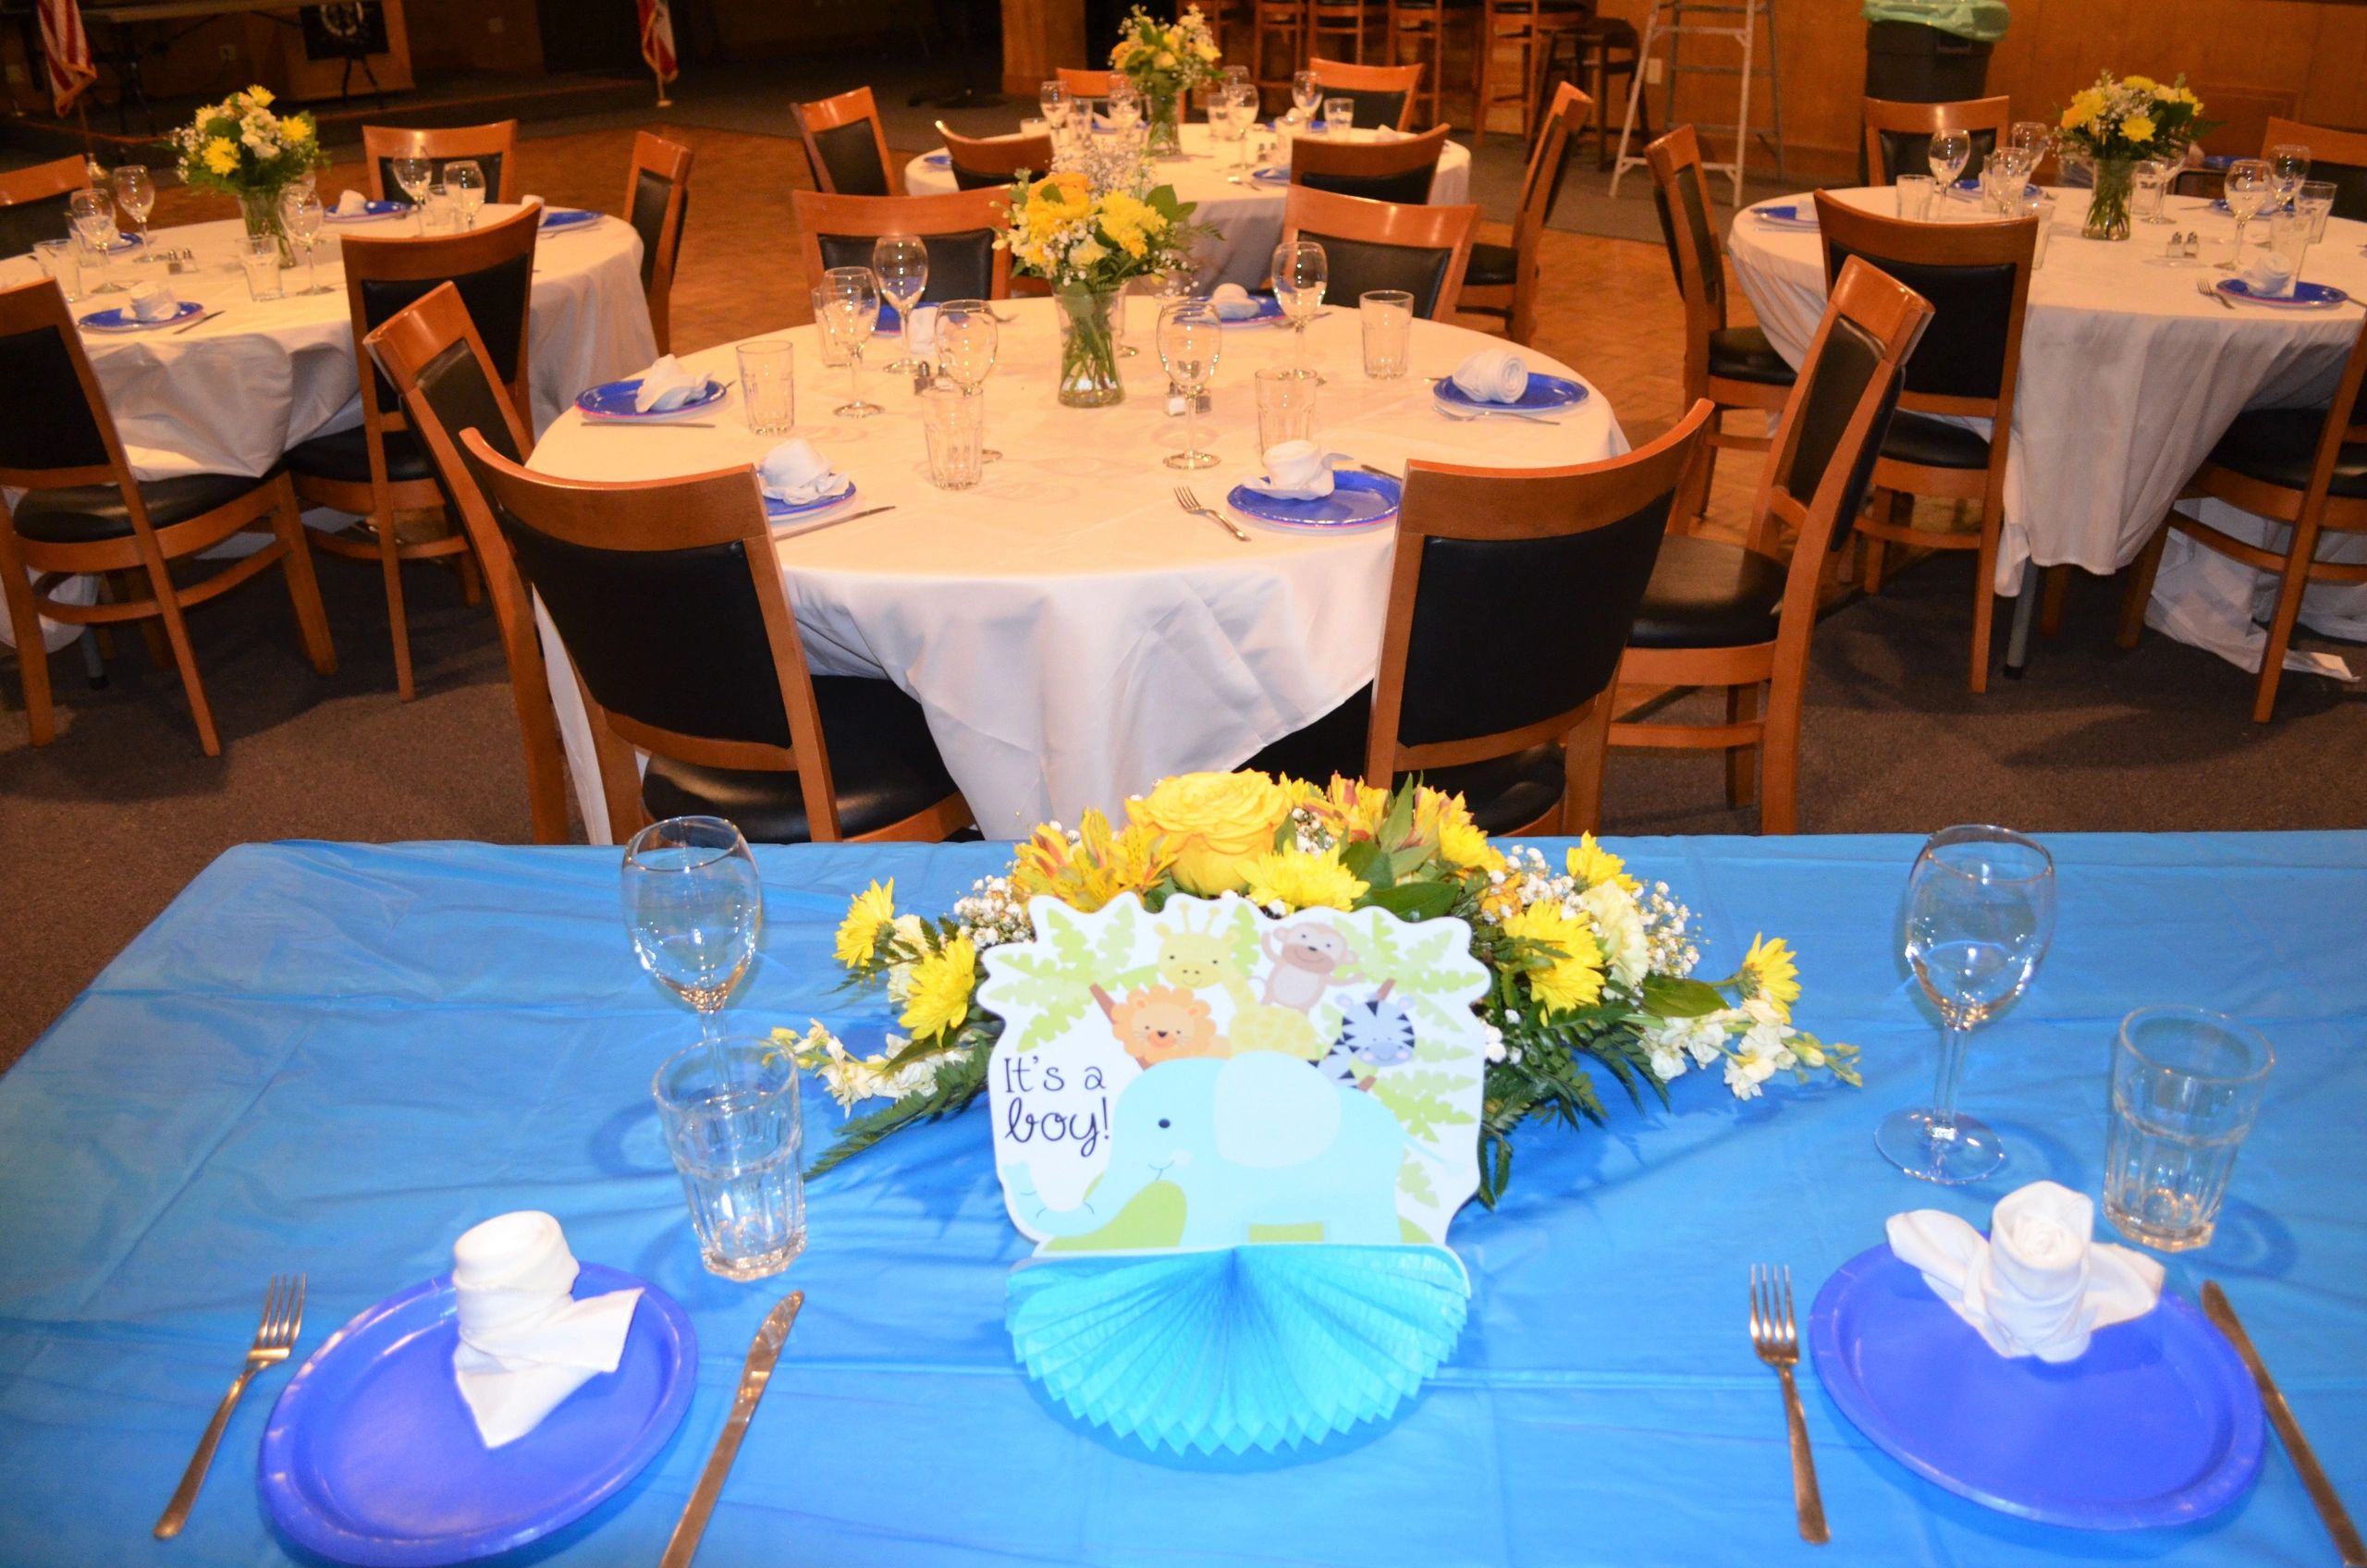 A photo taken in the Lodge Room showing table decorations for a baby shower.